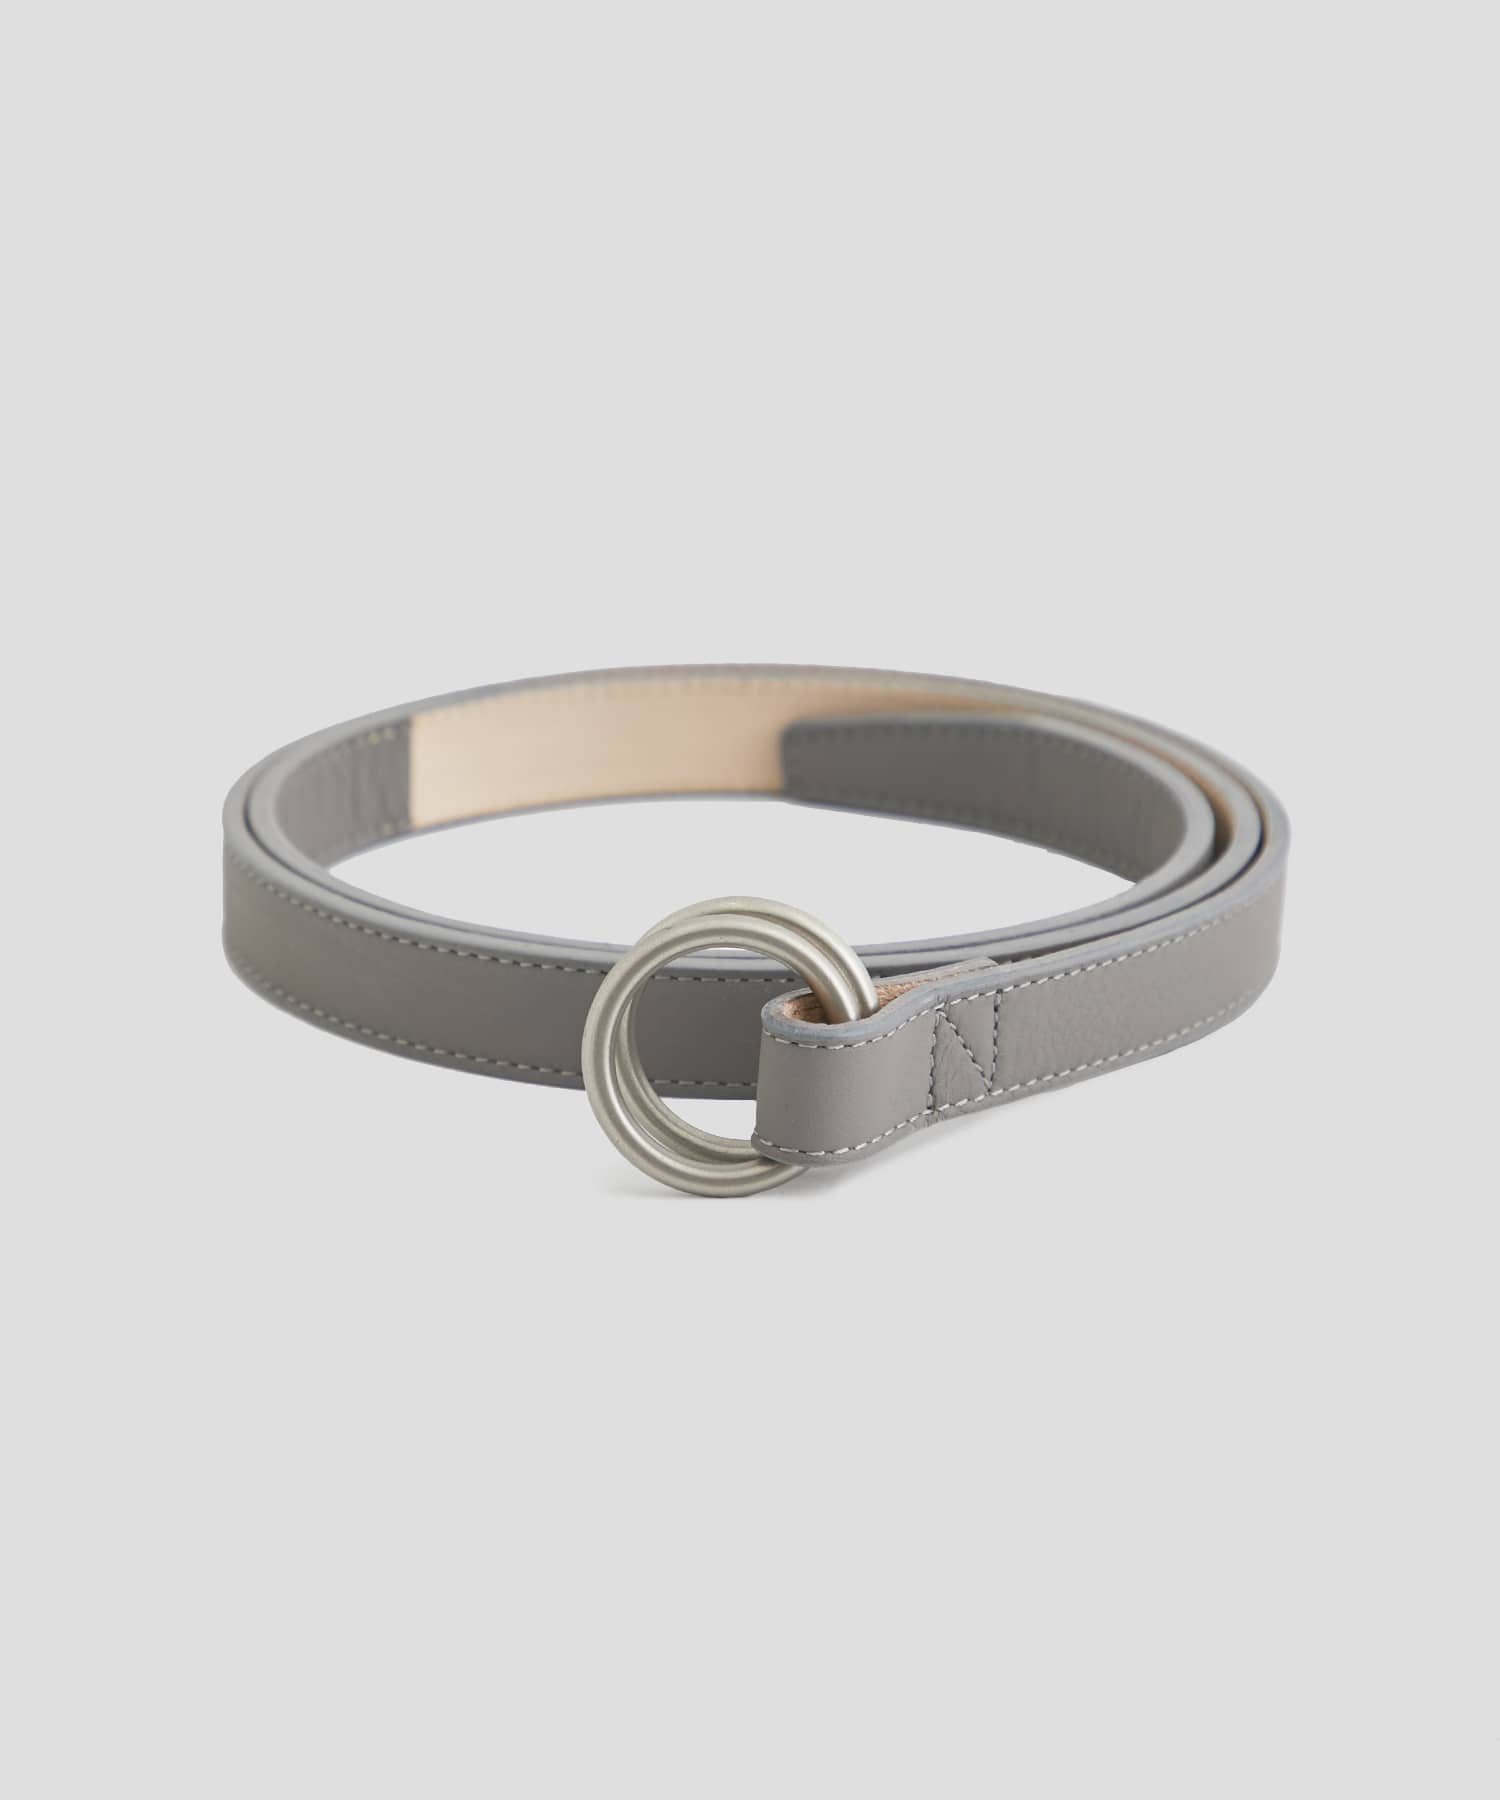 DWELLER RING BELTCOW LEATHER BY ECCO